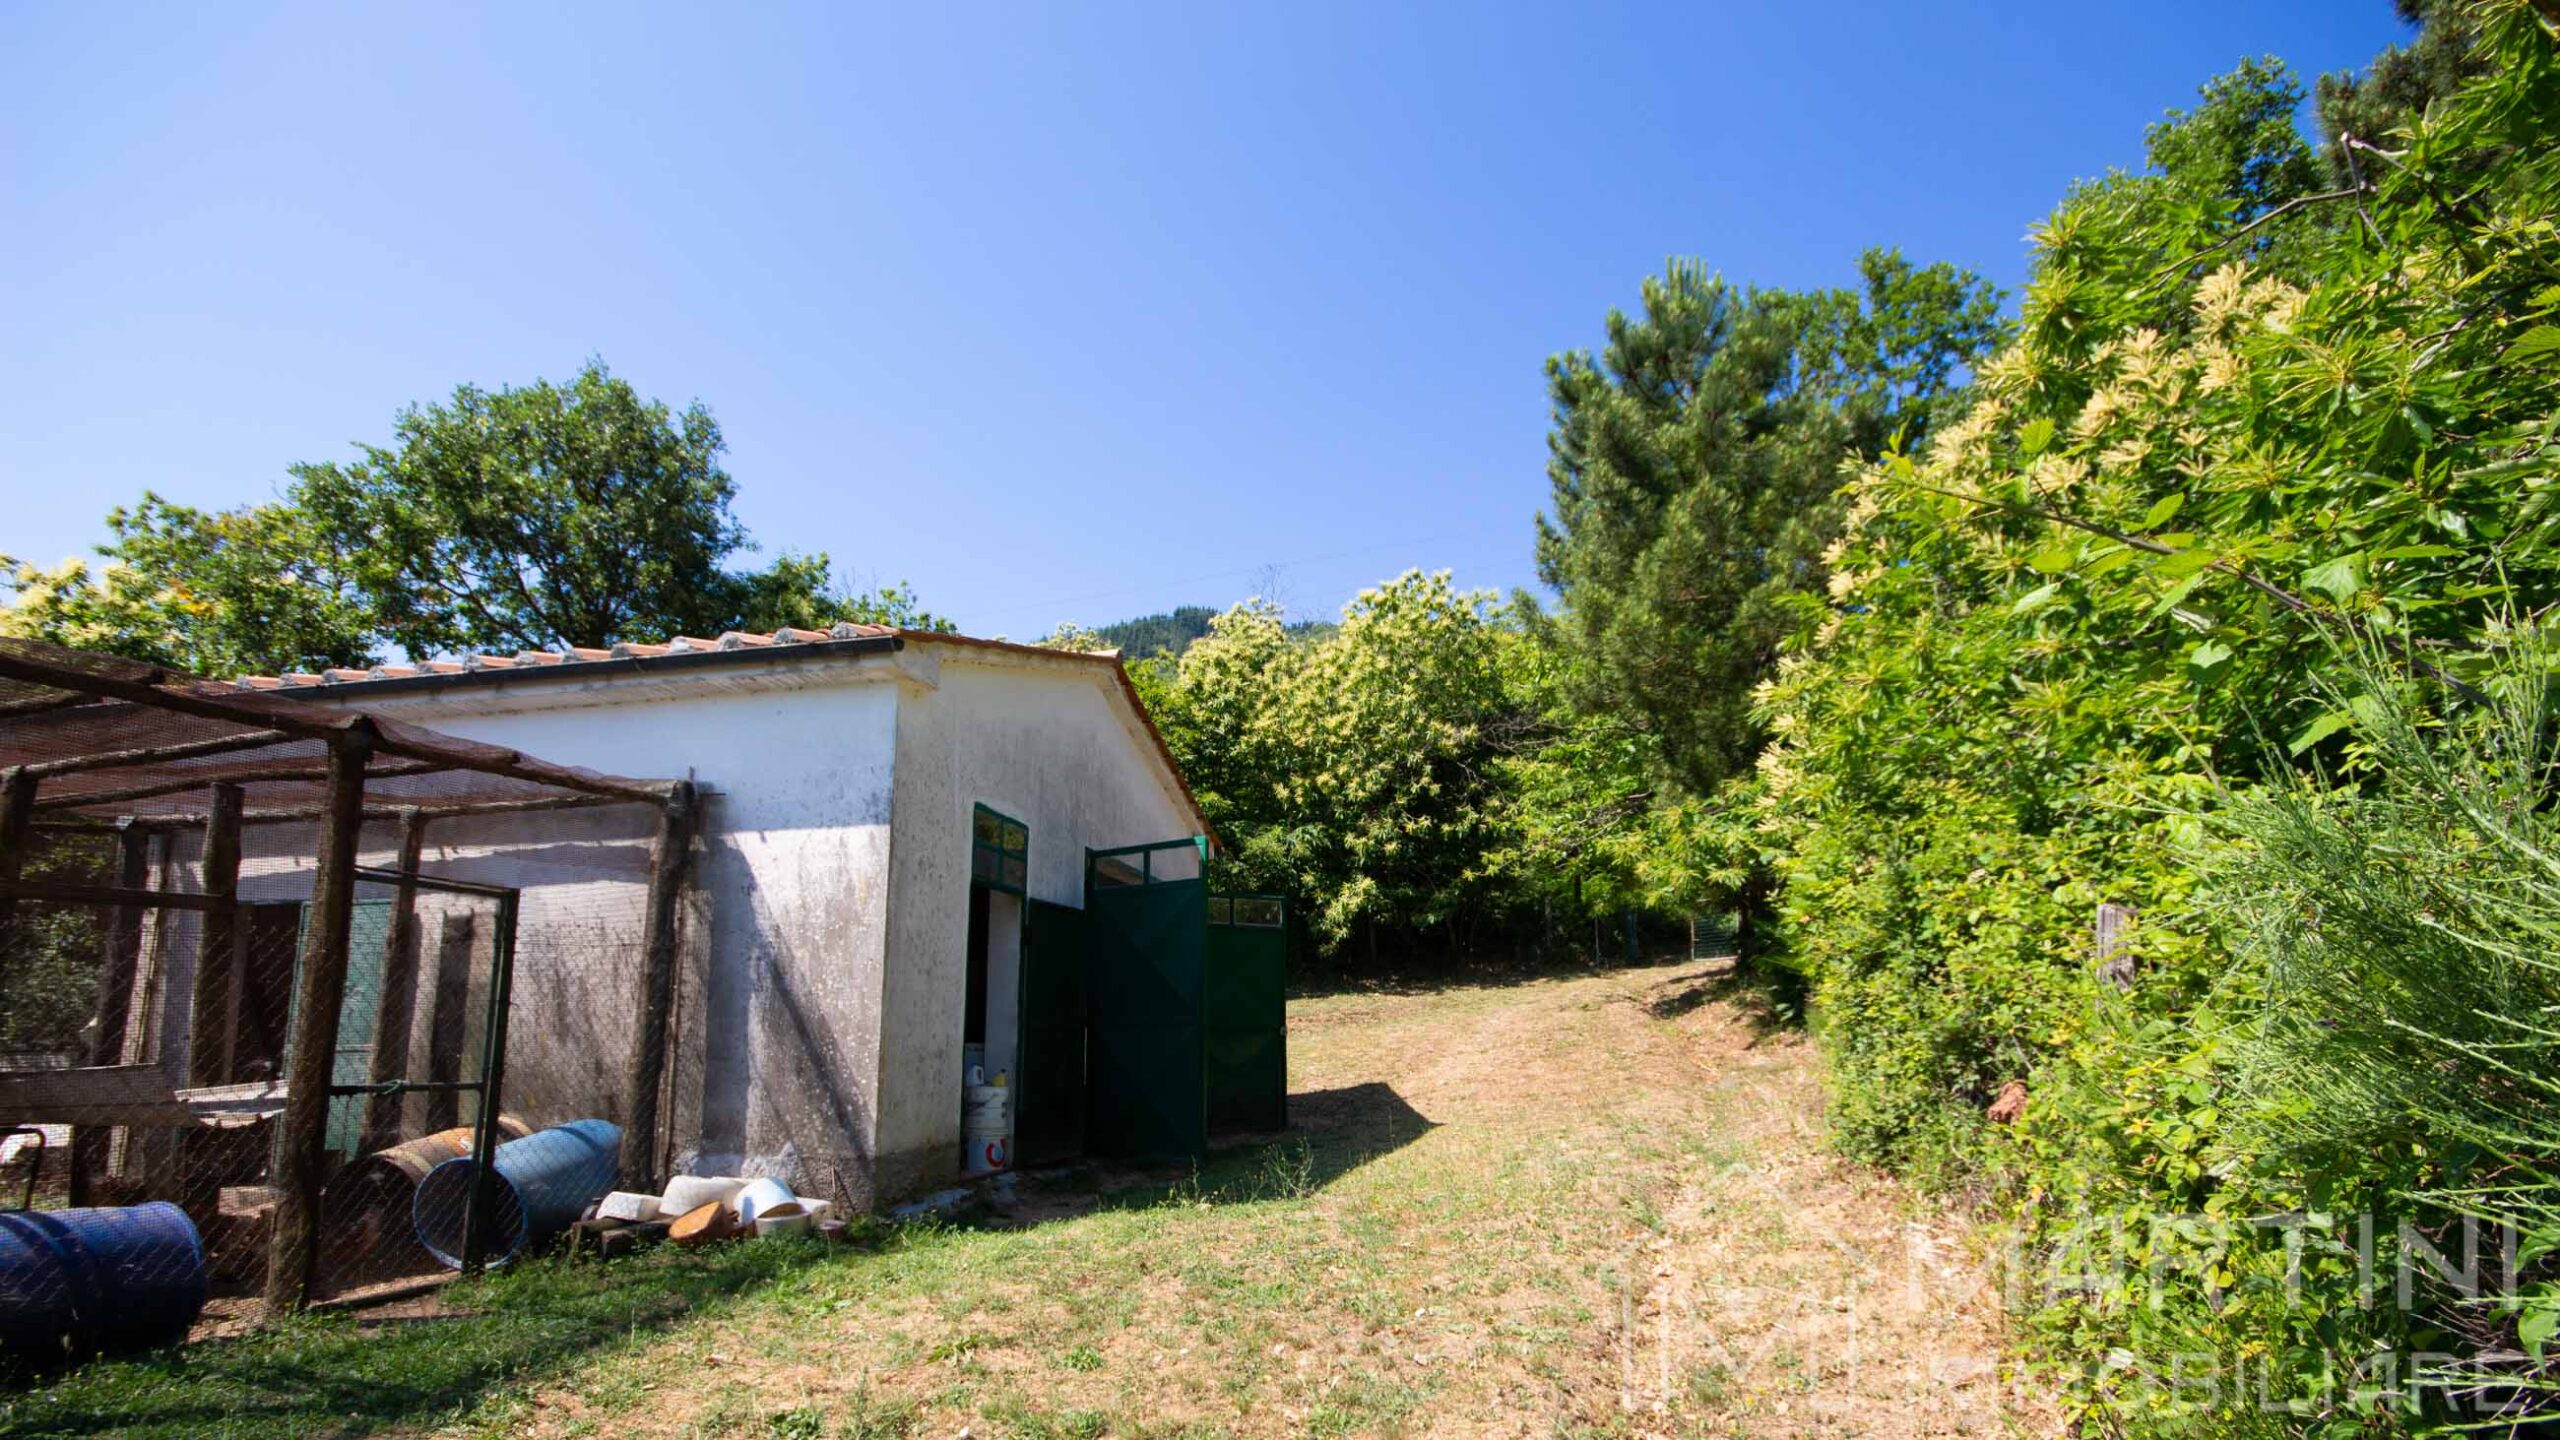 Annex with Land in Montieri, Tuscany